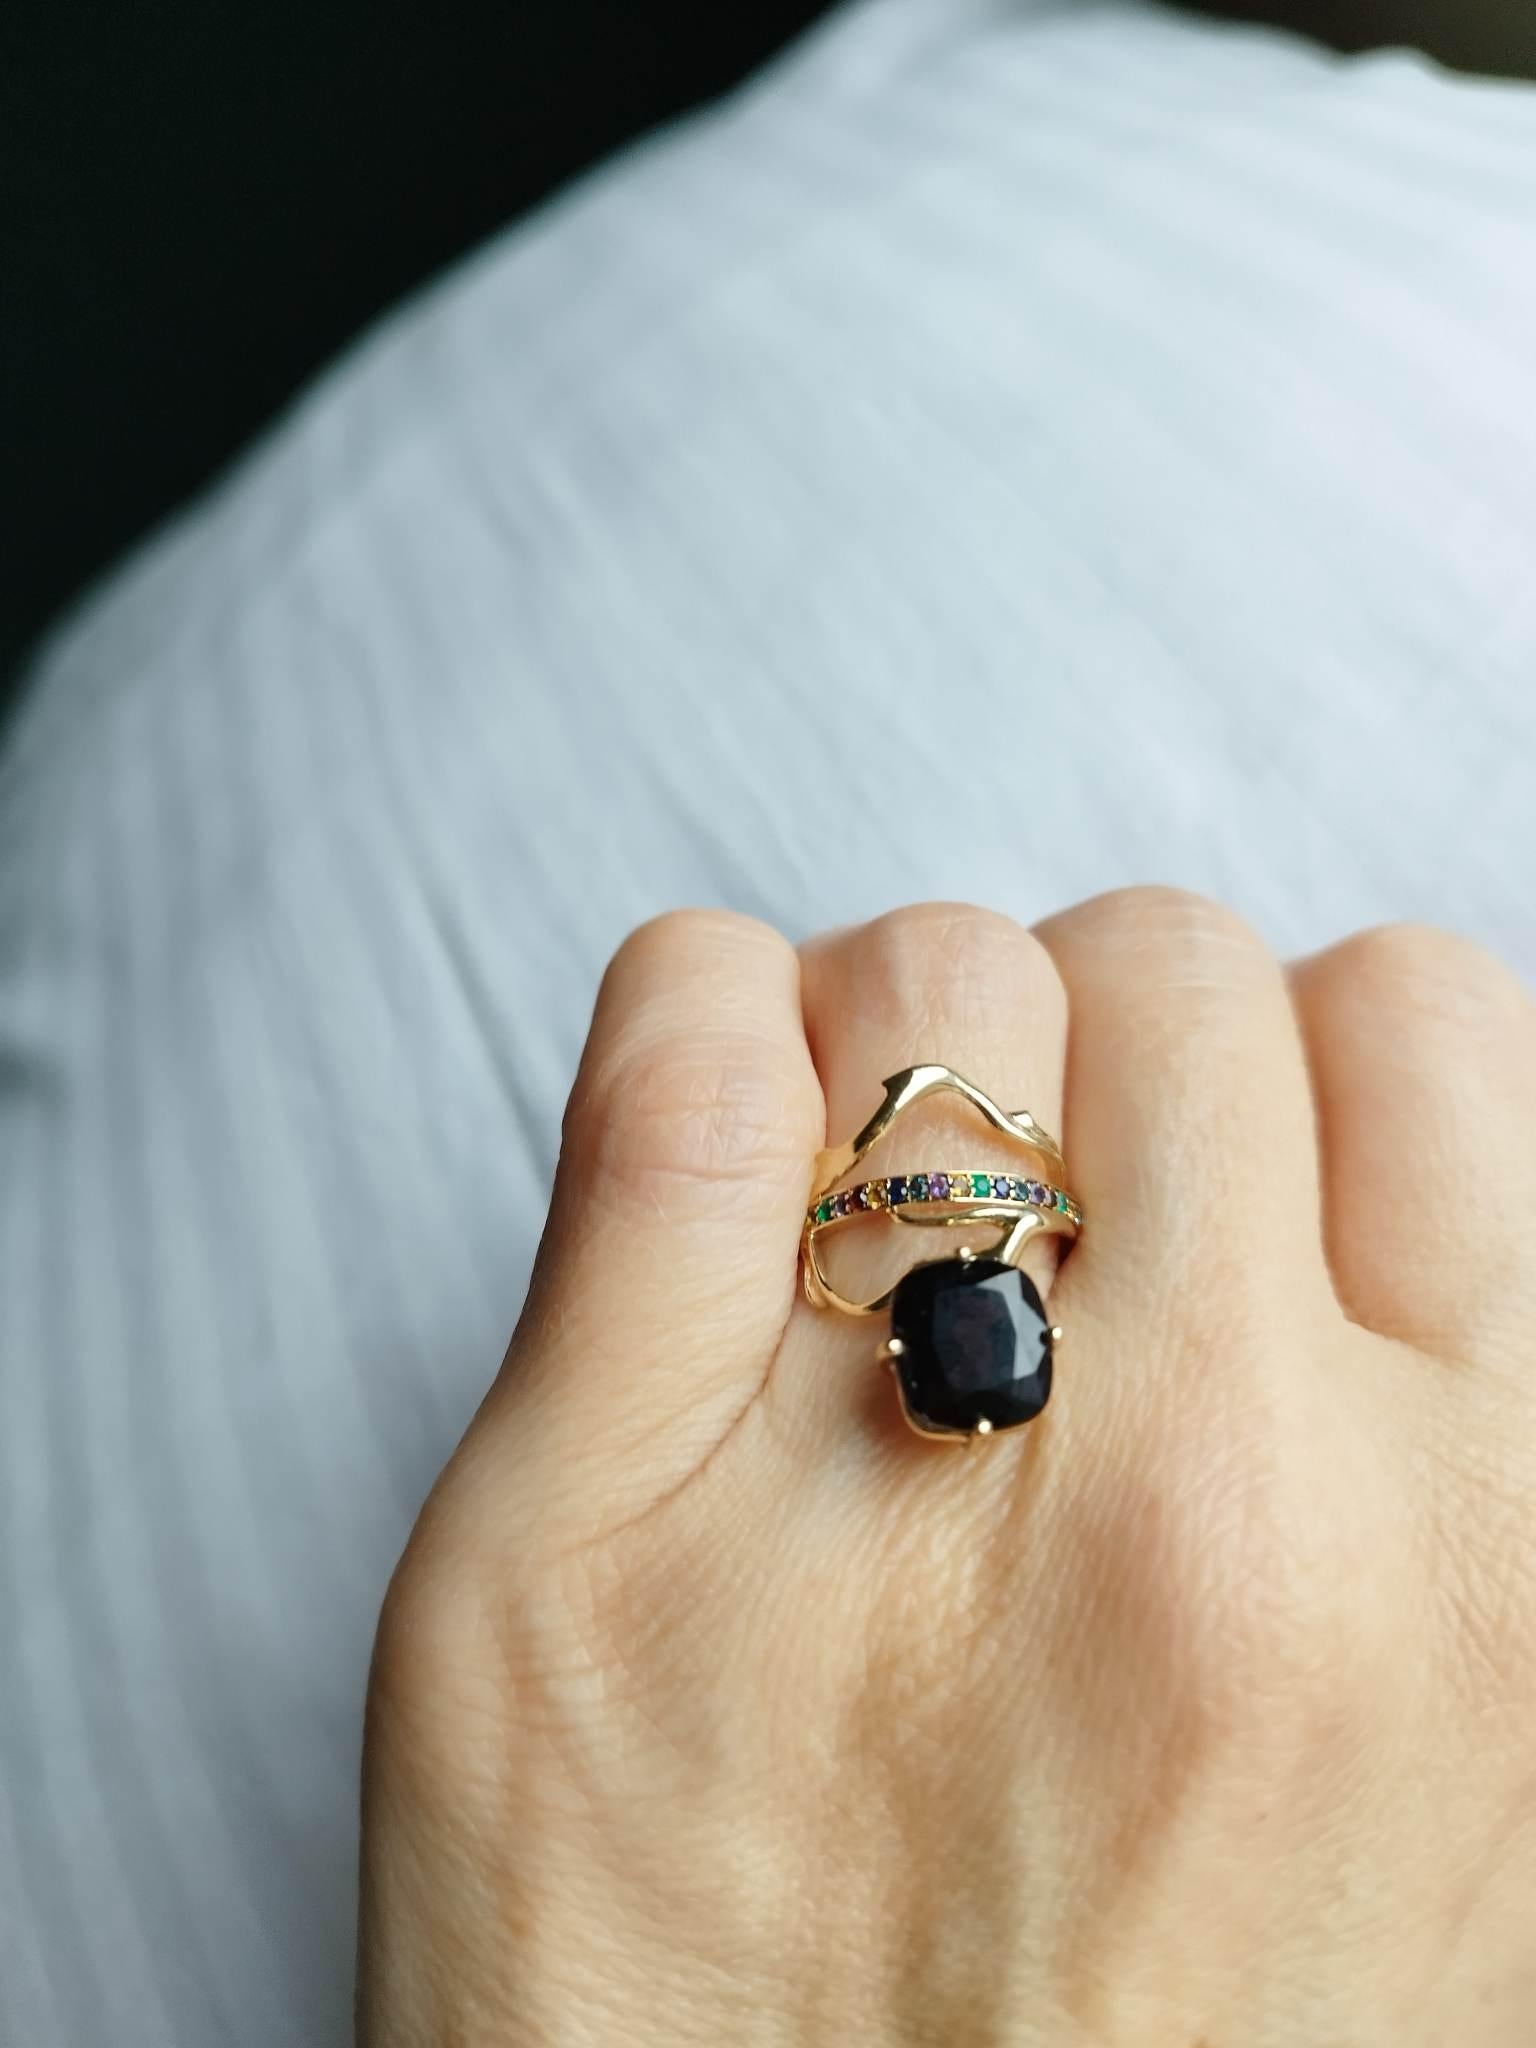 An unusual form makes this Tibetan 18 karat rose gold contemporary fashion ring an art object. It is encrusted with: colourful sapphires, diamonds, emeralds and cushion spinel  (3-5 carats, dark purple or transparent lilac lavender up to your